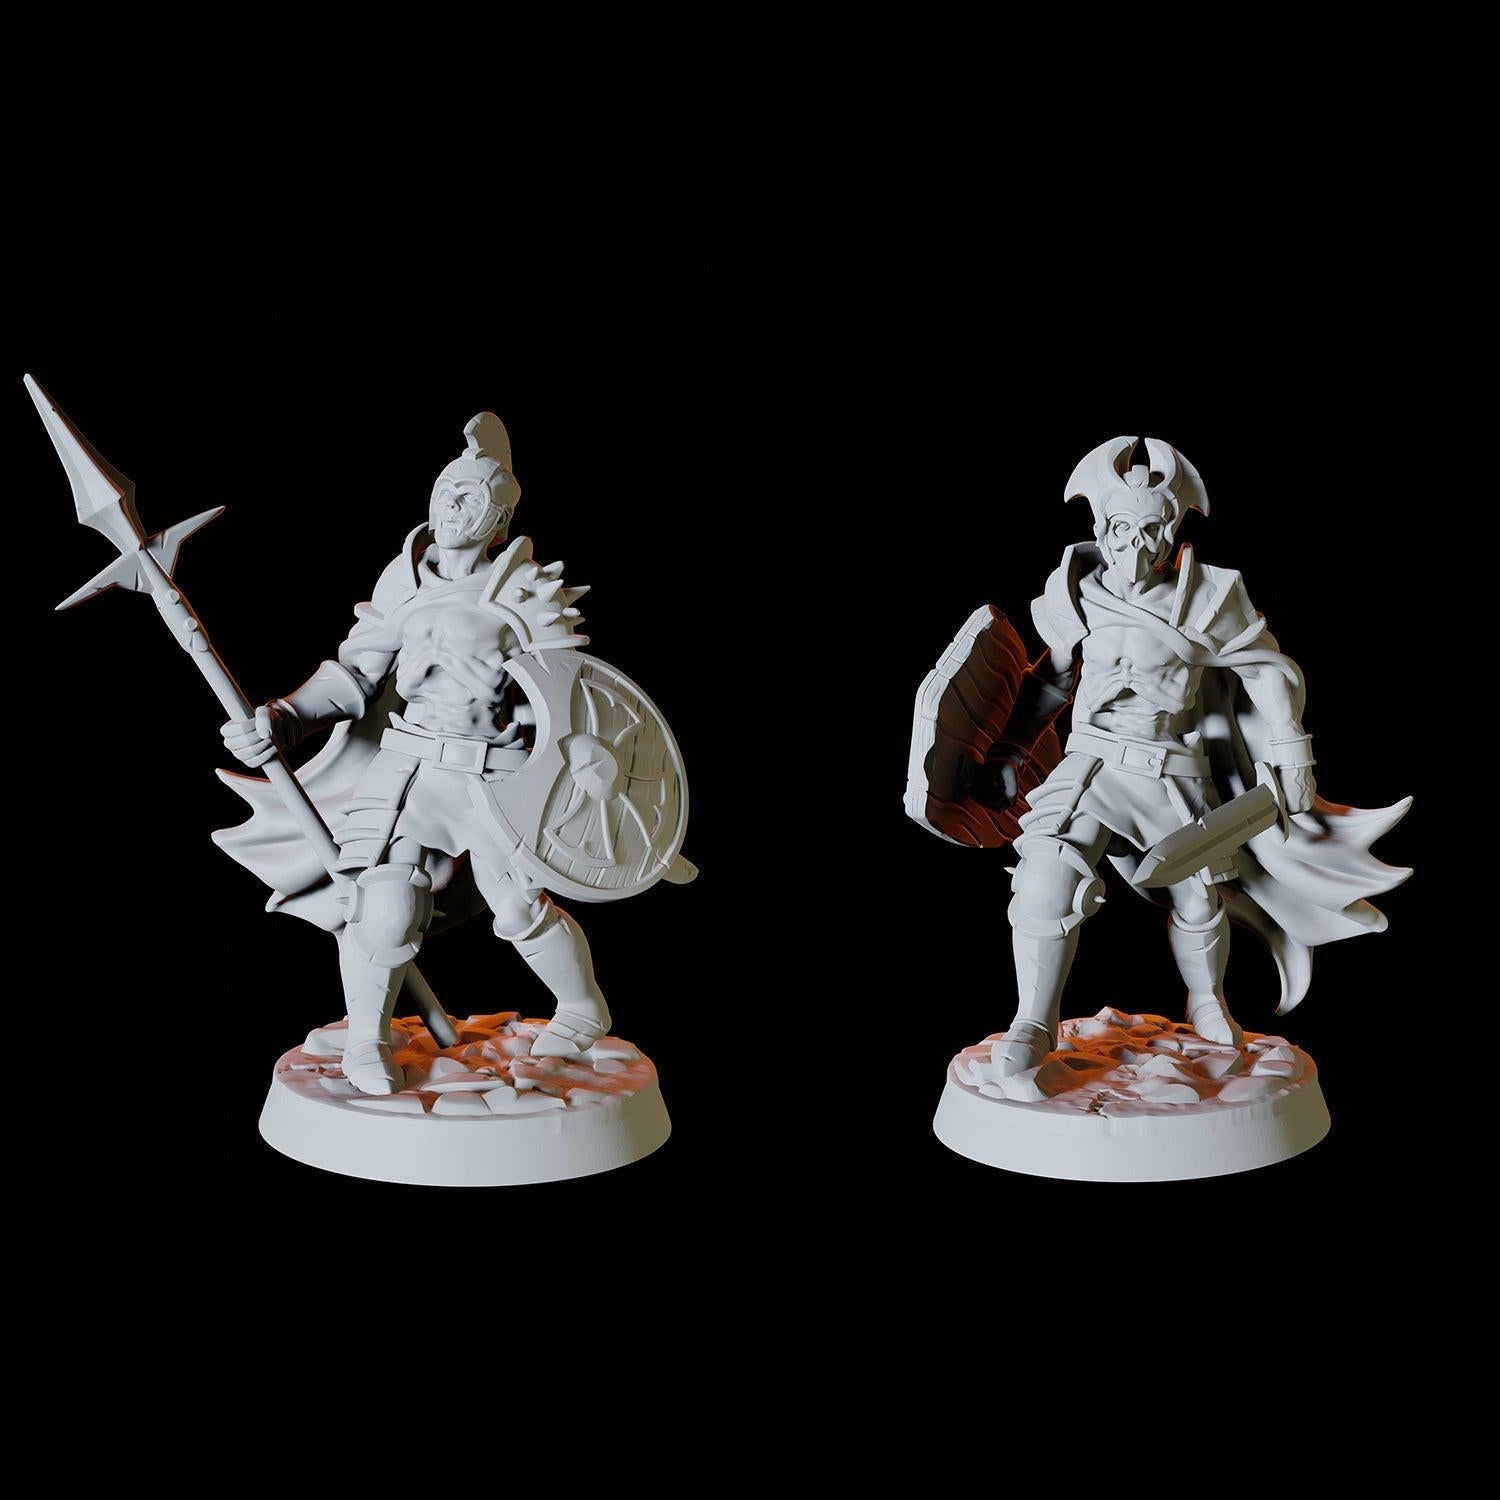 Two Undead Skeleton Warrior Miniatures for Dungeons and Dragons - Myth Forged